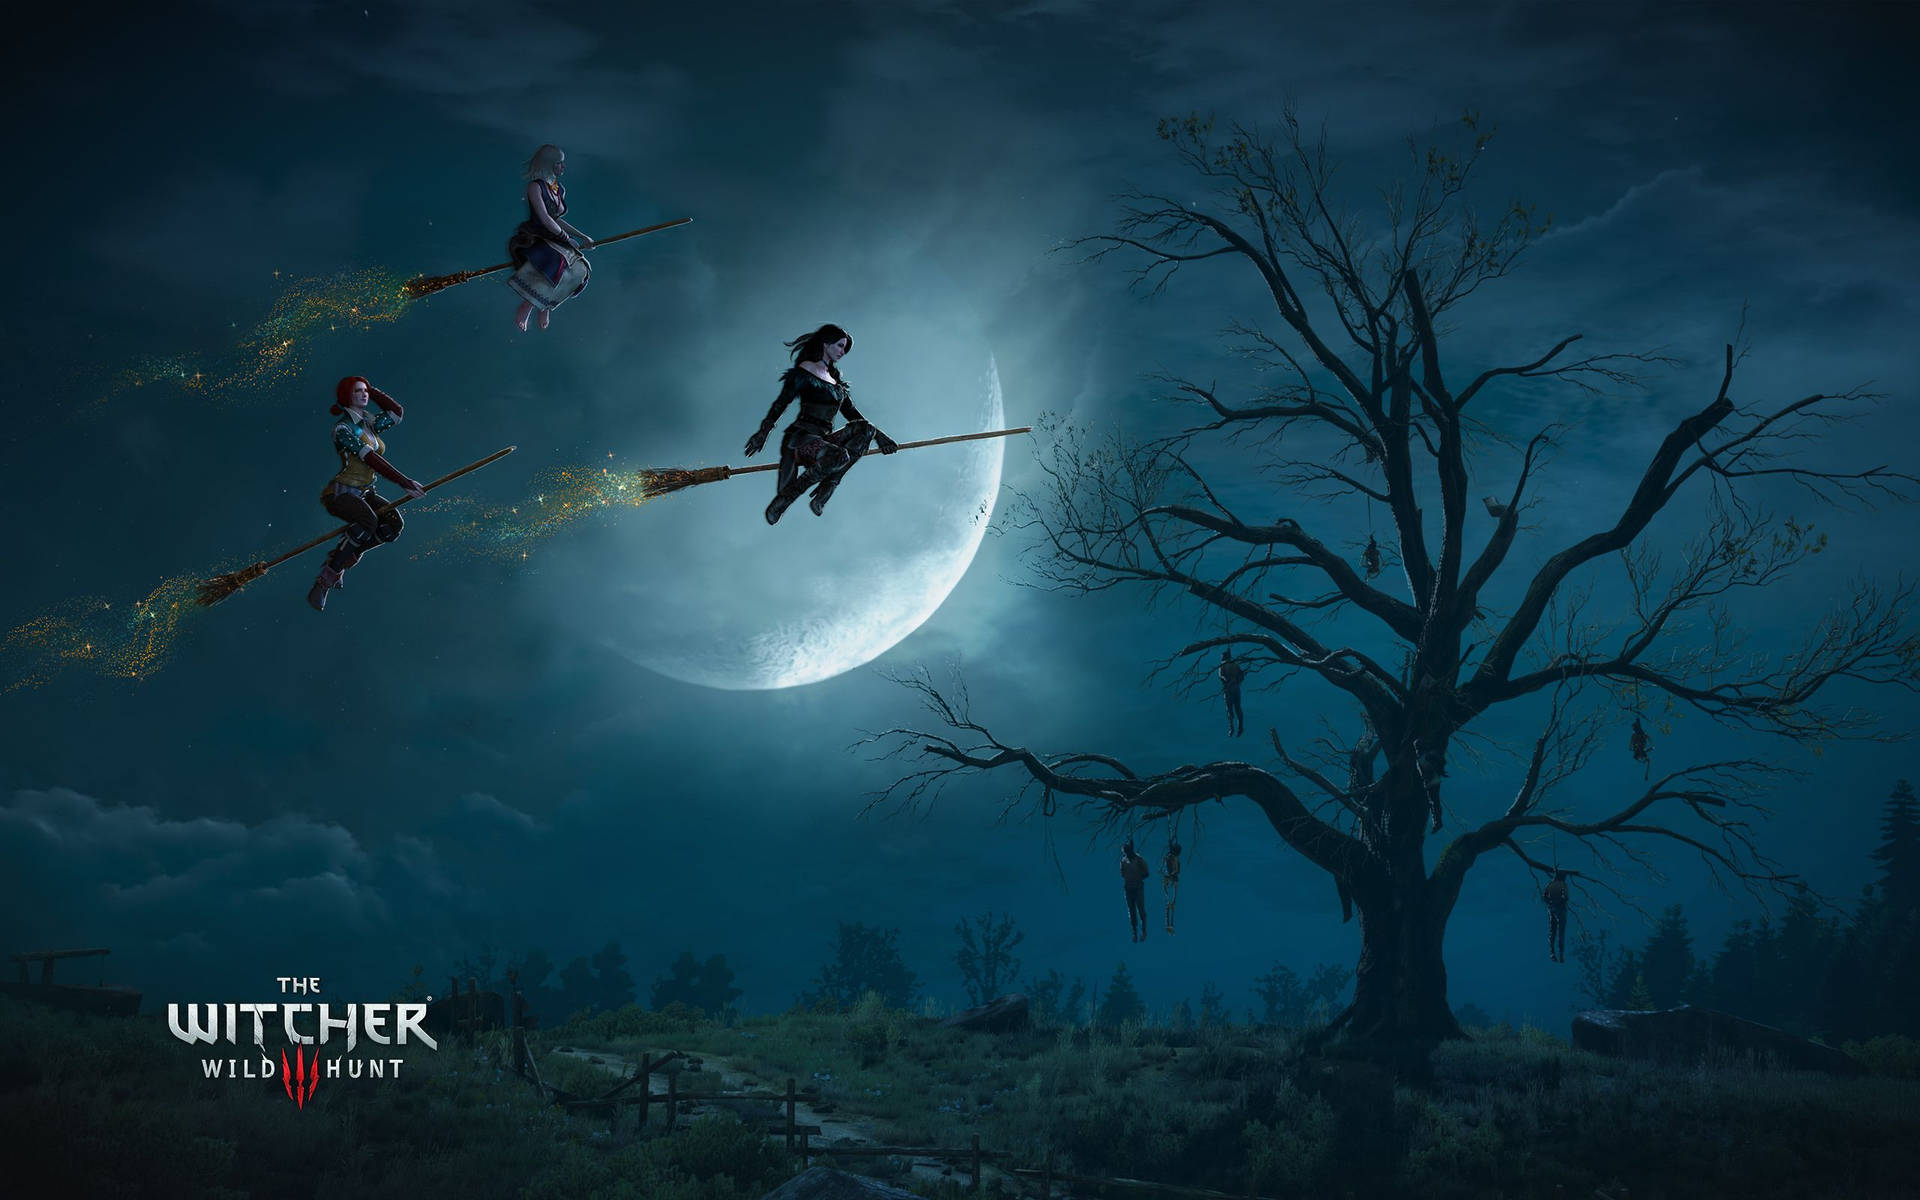 Jump into a dark adventure filled with dark magic, mythical creatures and epic battles with The Witcher 3: Wild Hunt Wallpaper